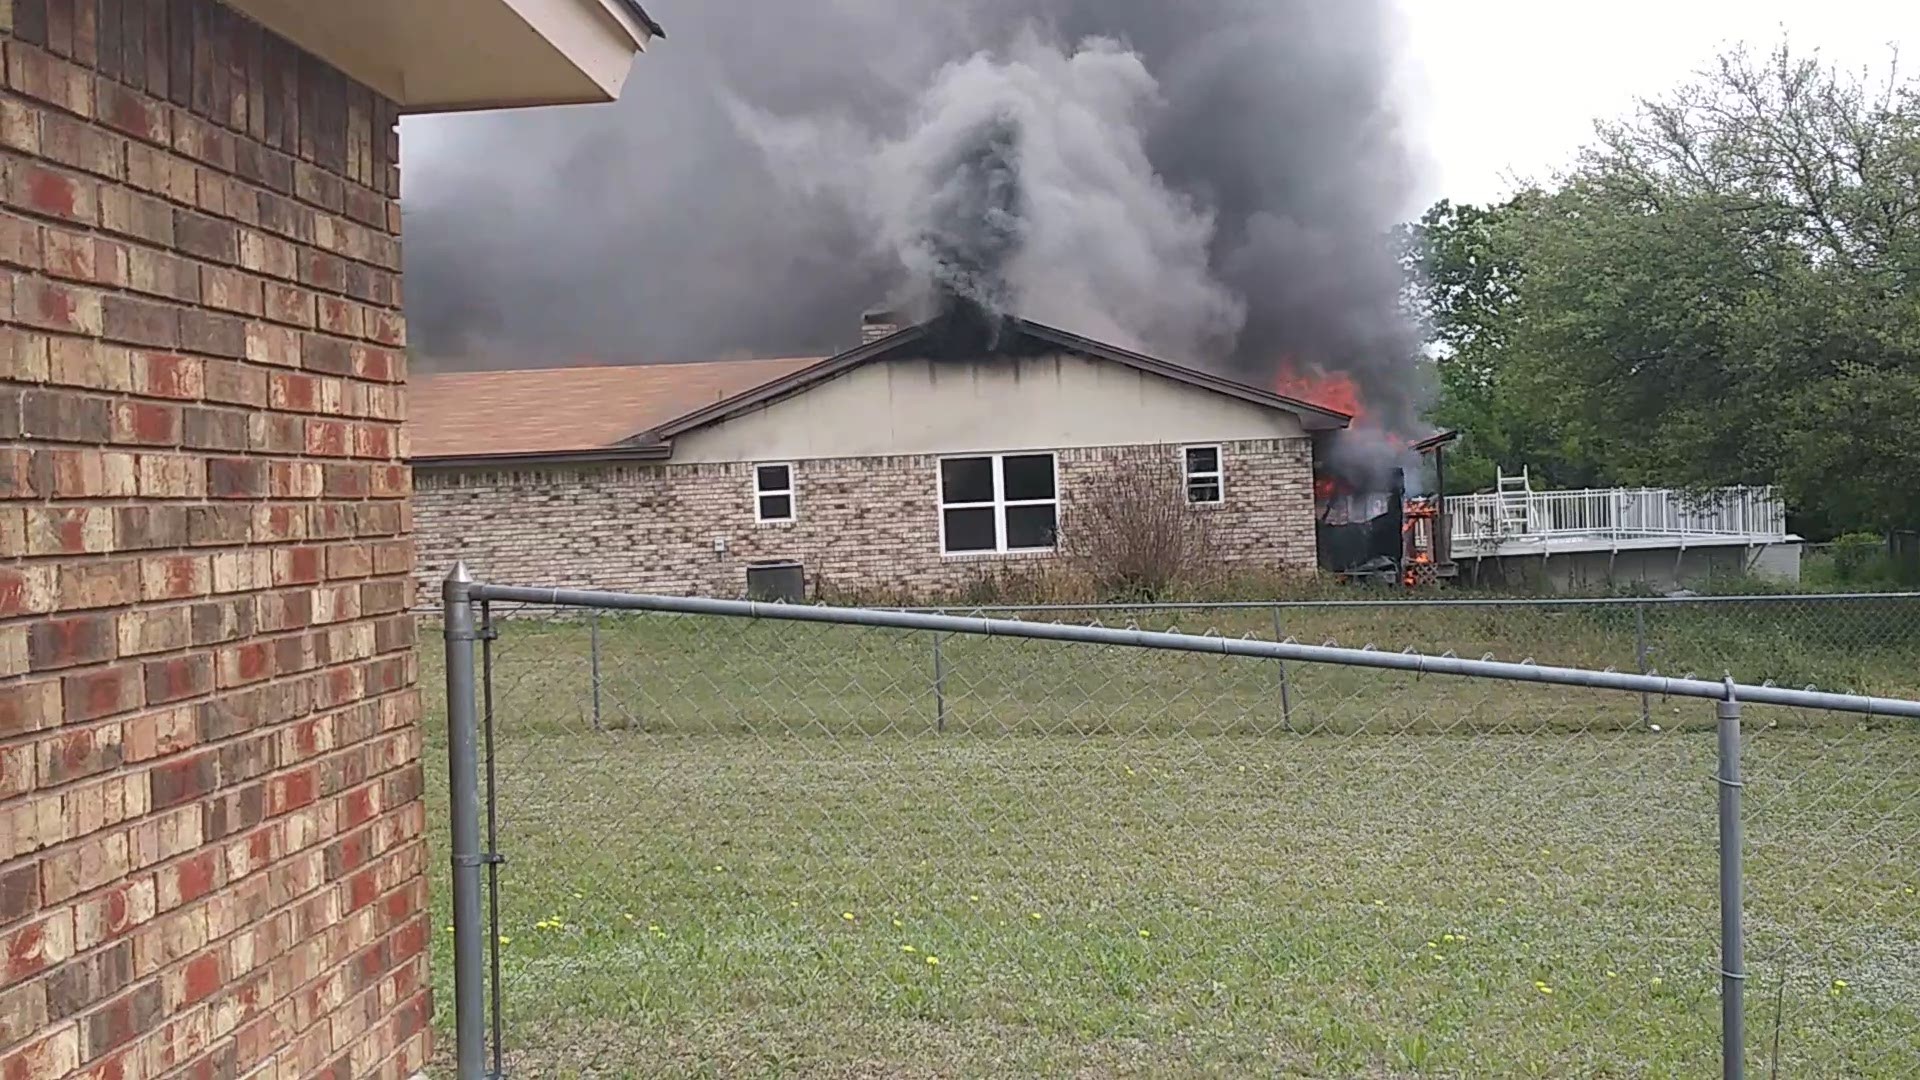 KCEN viewer Christie Jones sent this video of a fire in Copperas Cove that left a home a total loss.